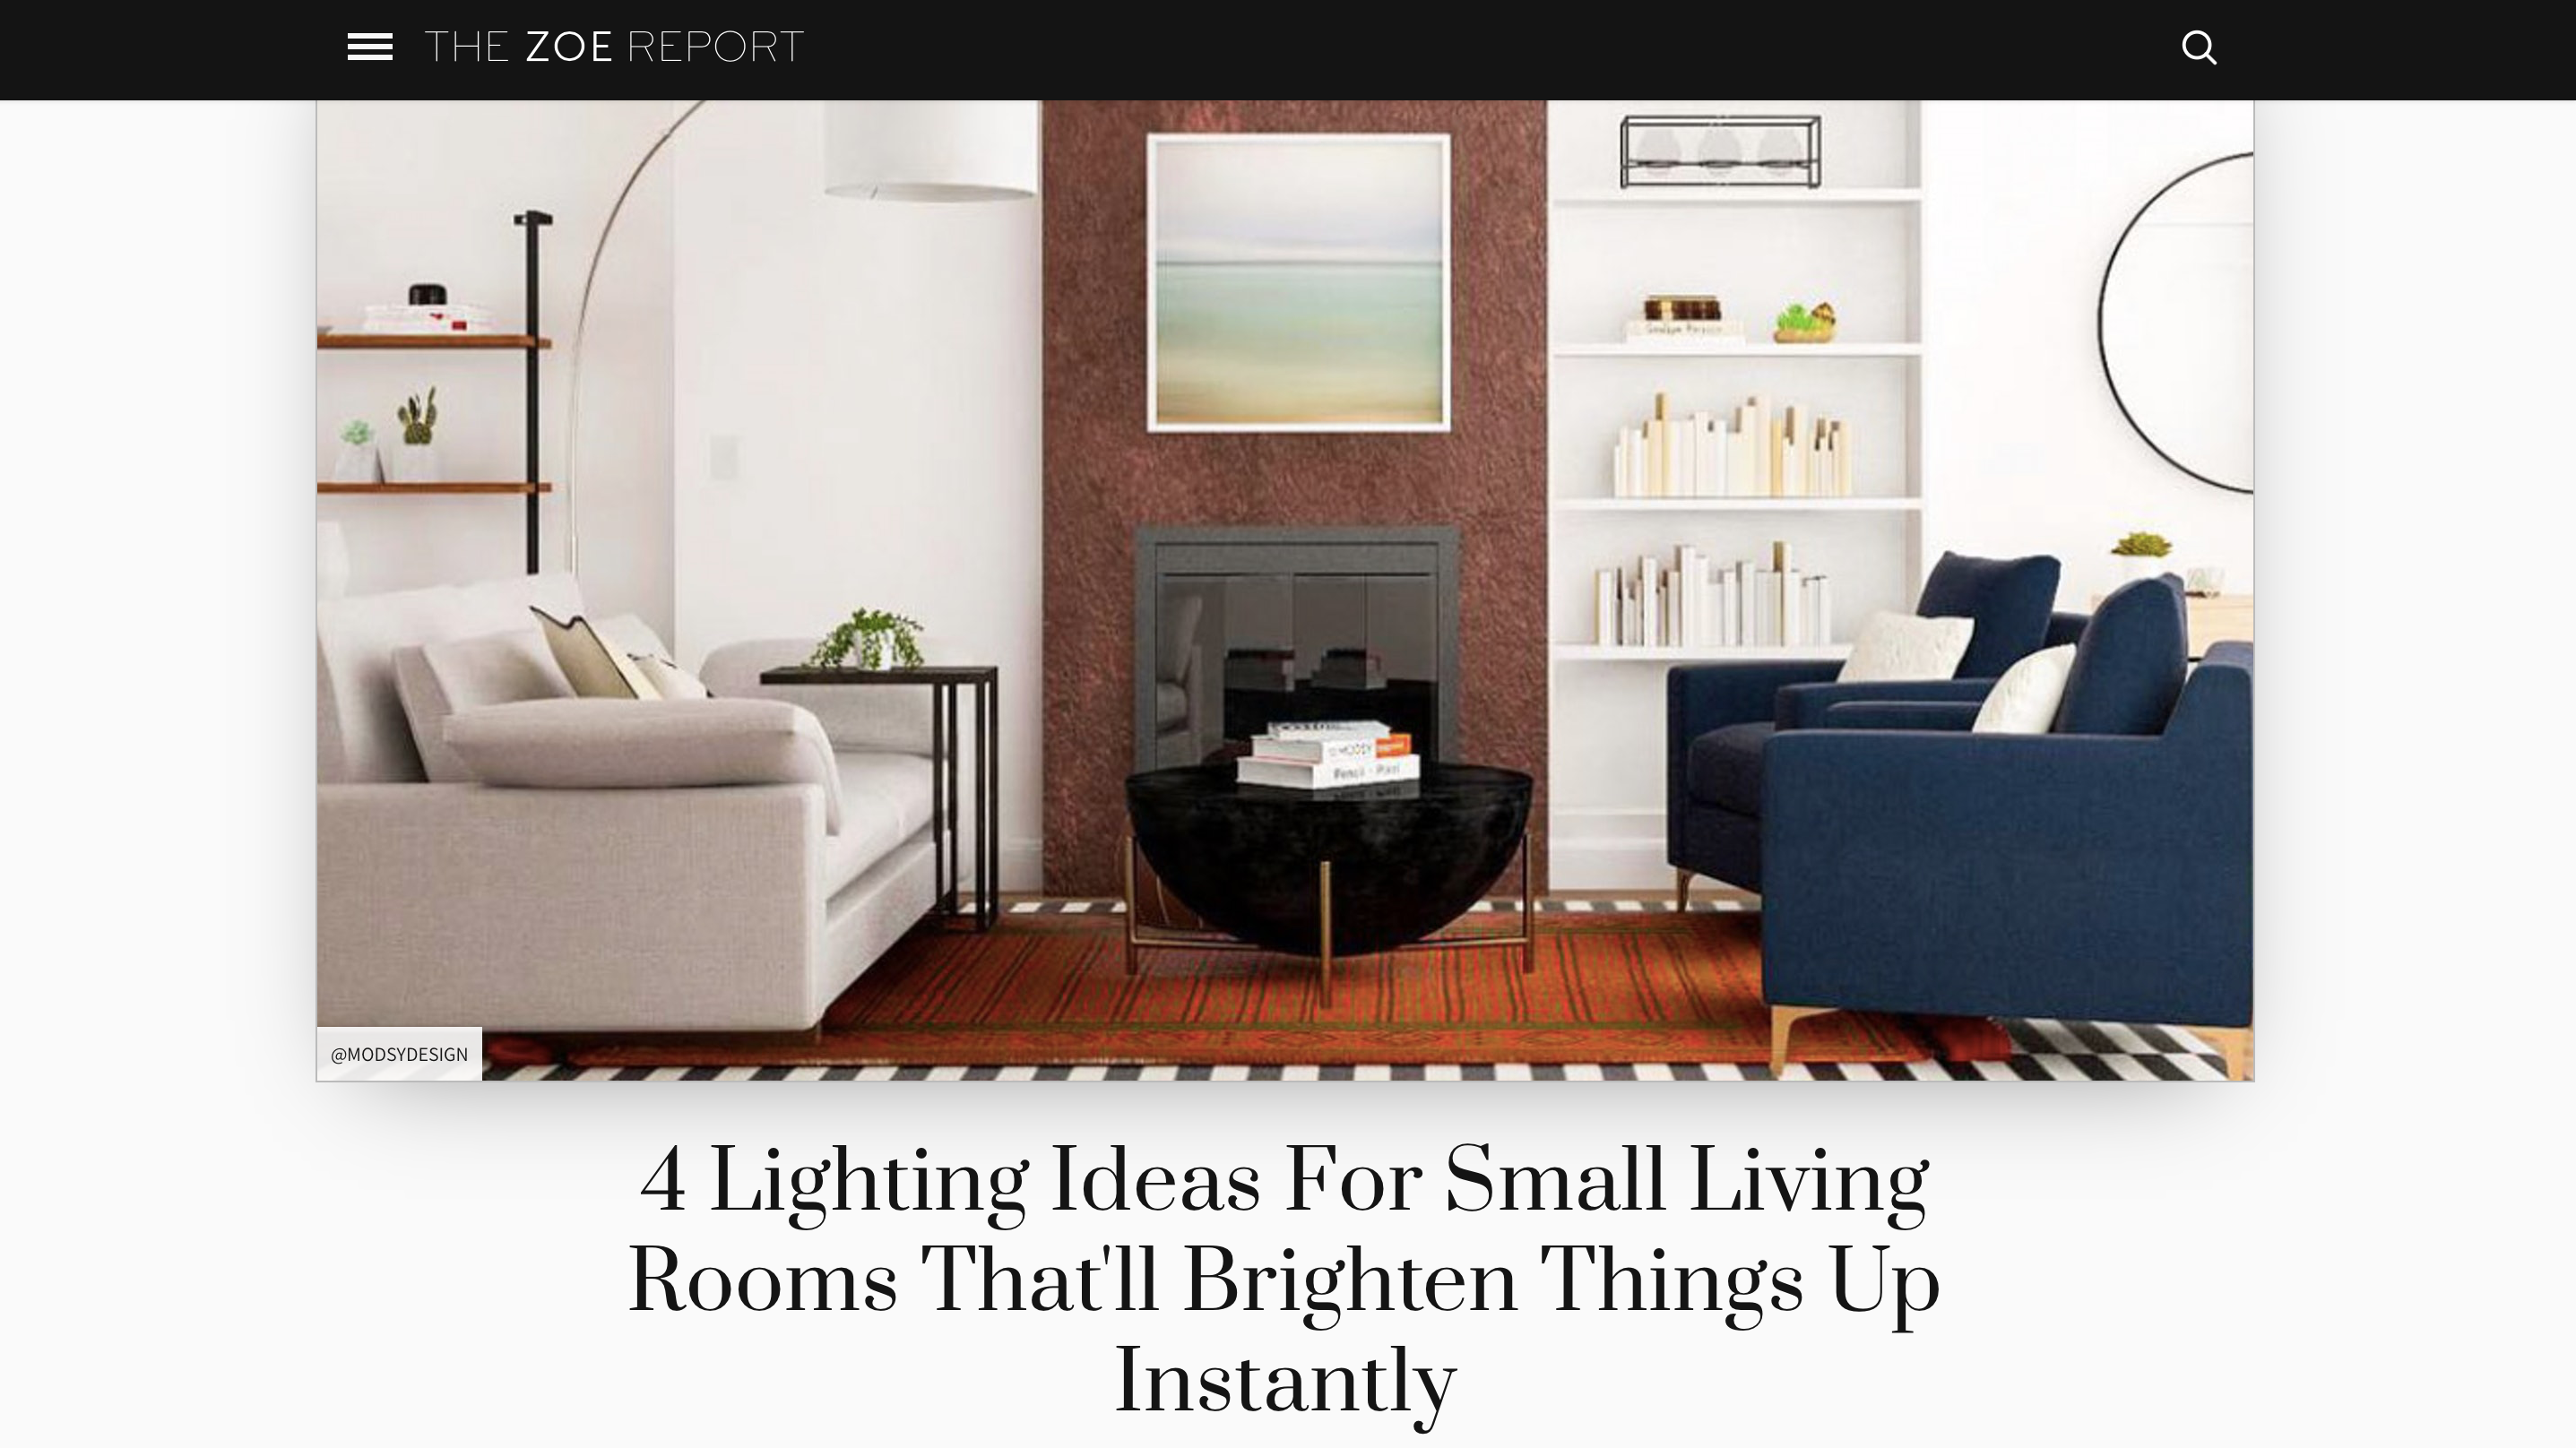 4 Lighting Ideas For Small Living Rooms That'll Brighten Things Up Instantly